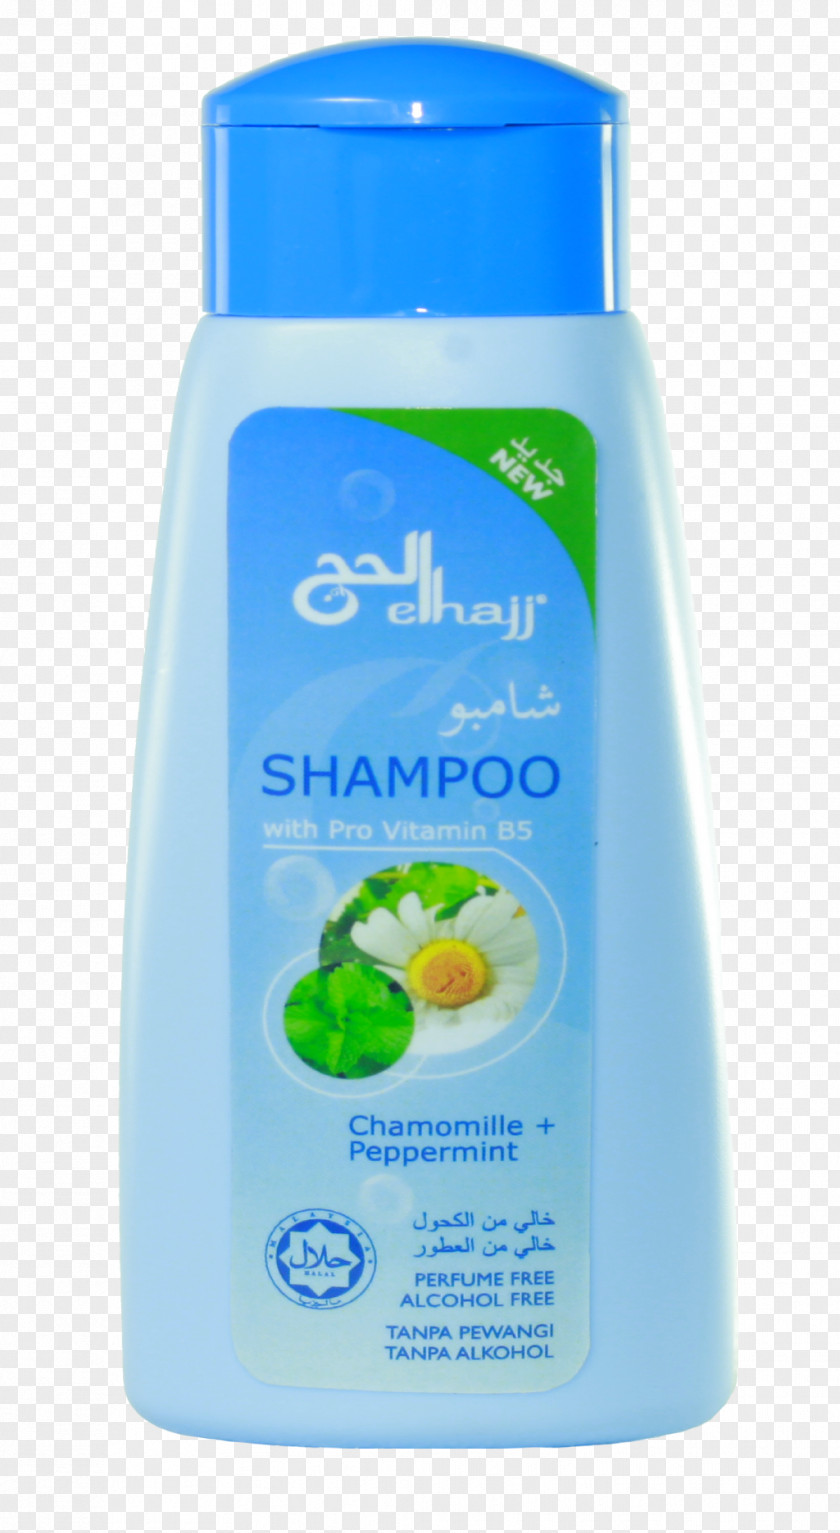 Shampoo PNG clipart PNG